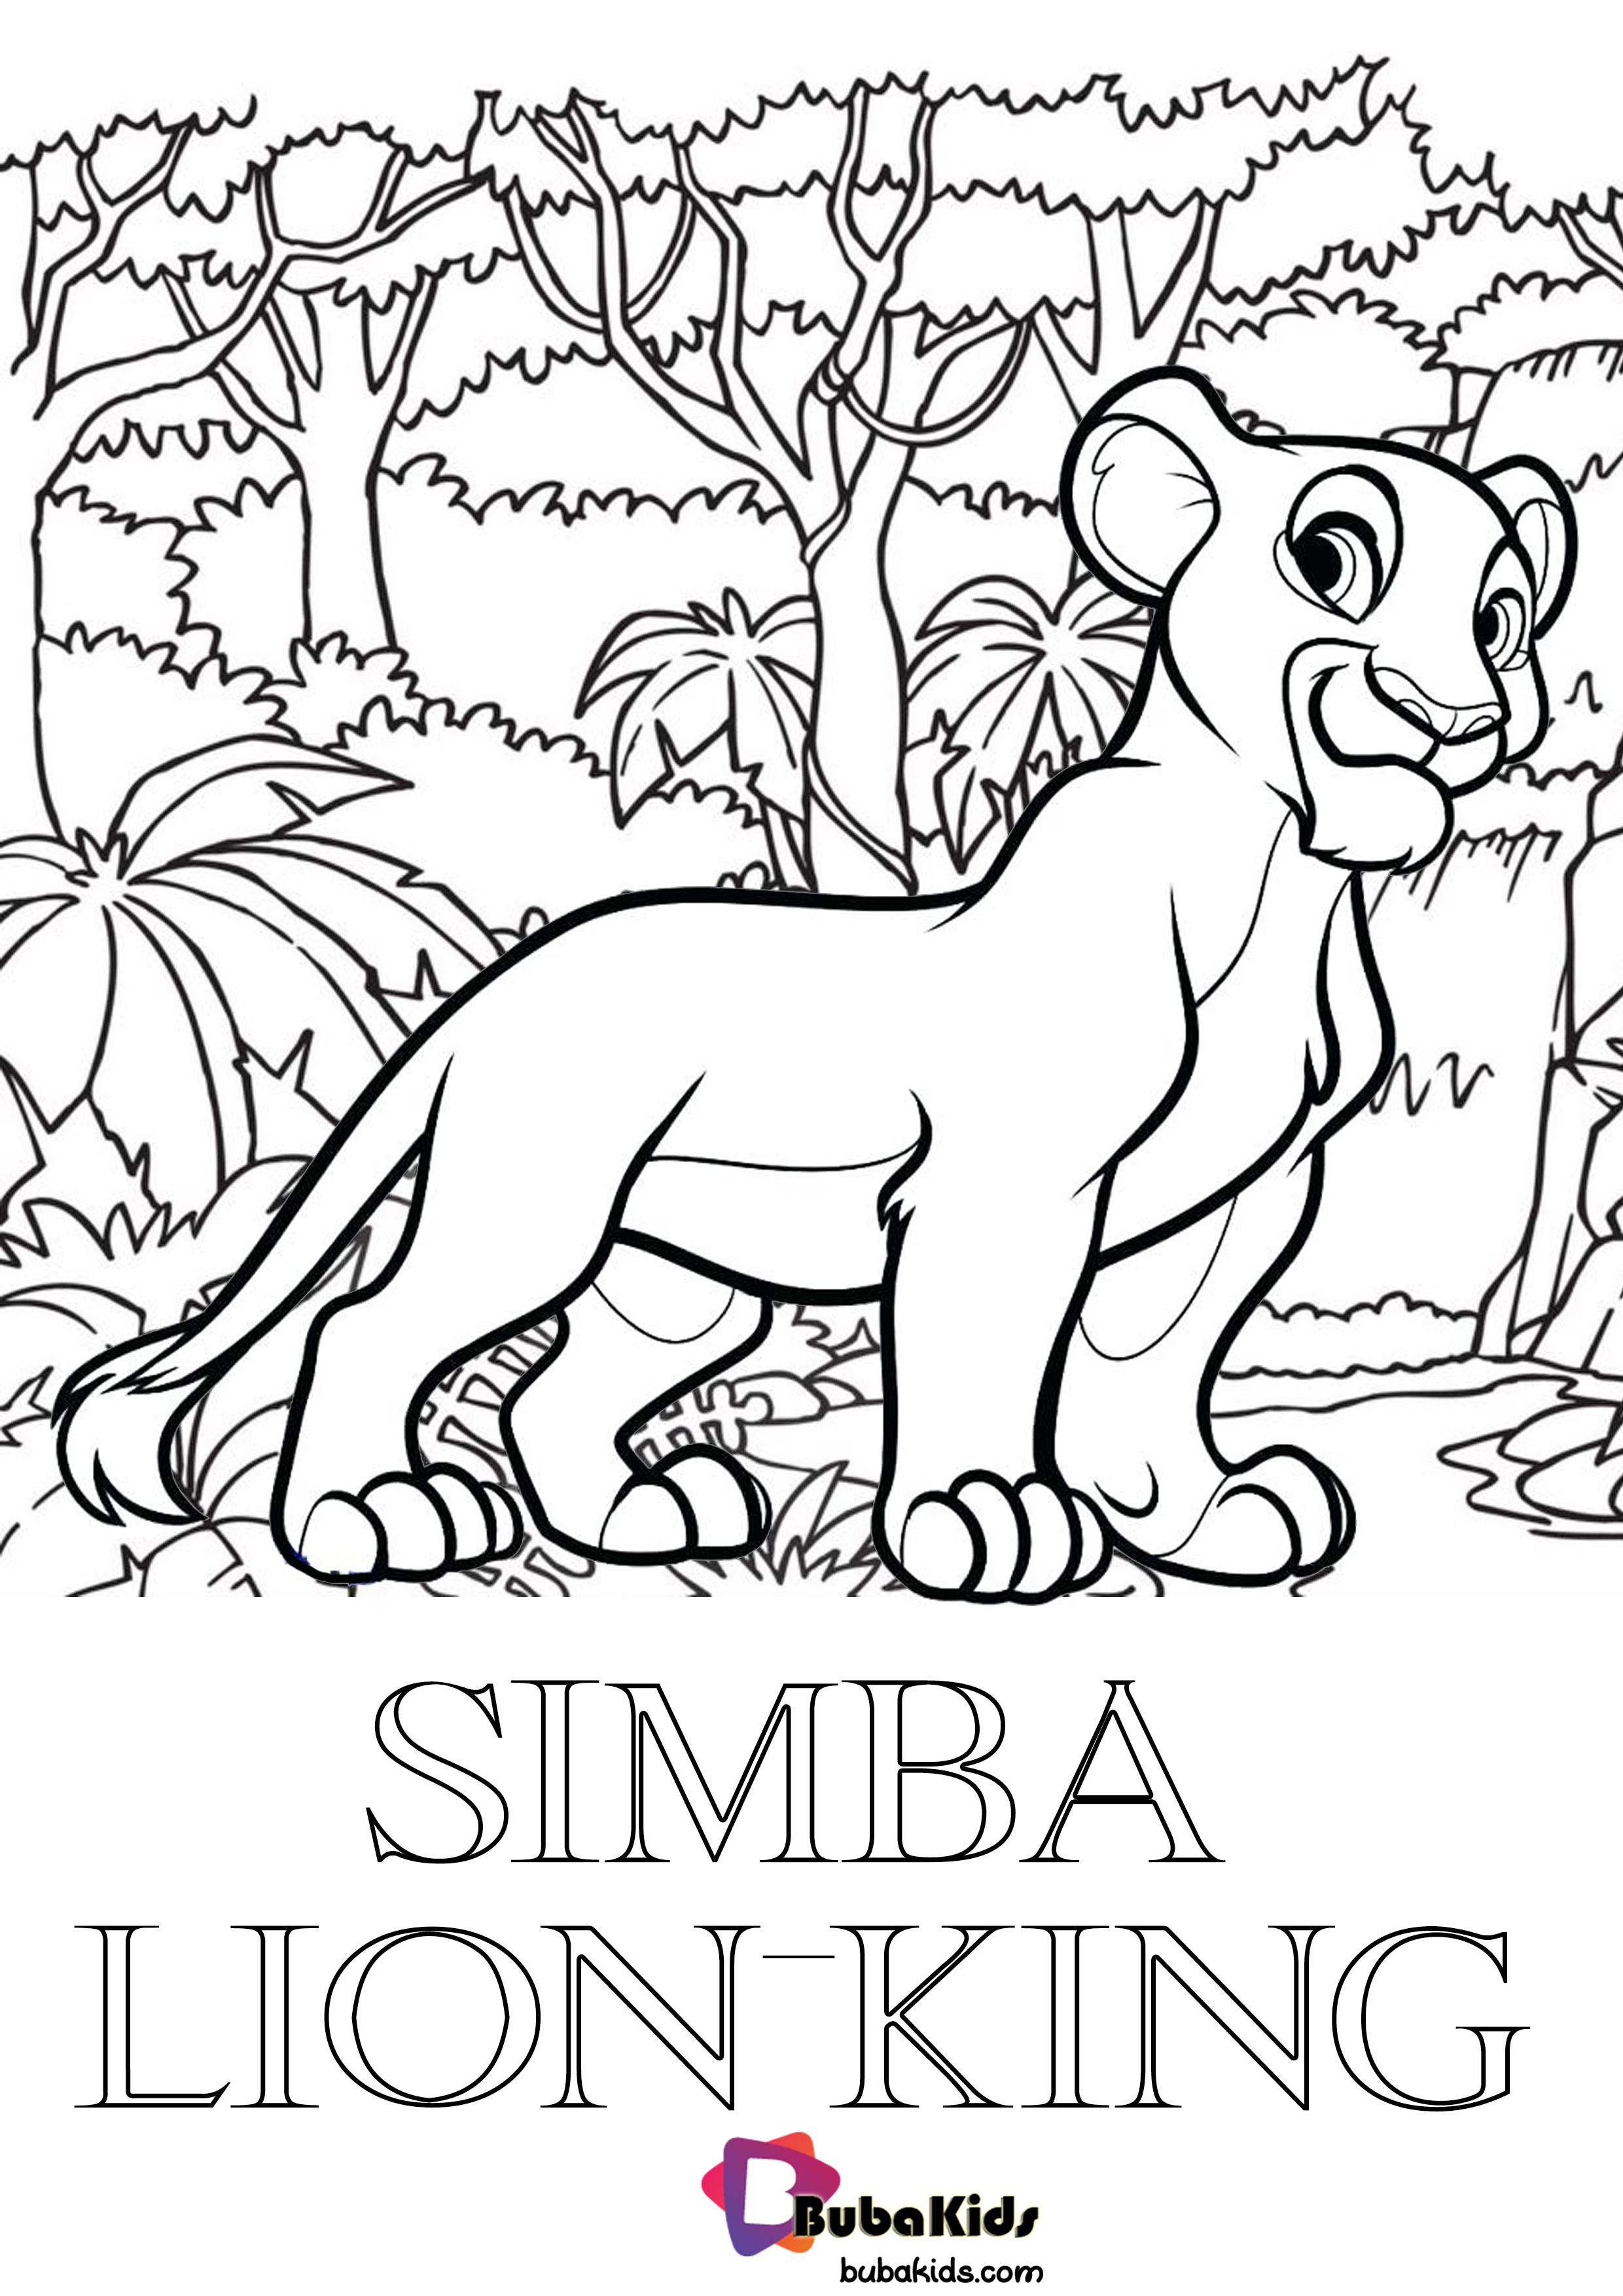 Simba The Lion King in The Jungle Coloring Pages Wallpaper